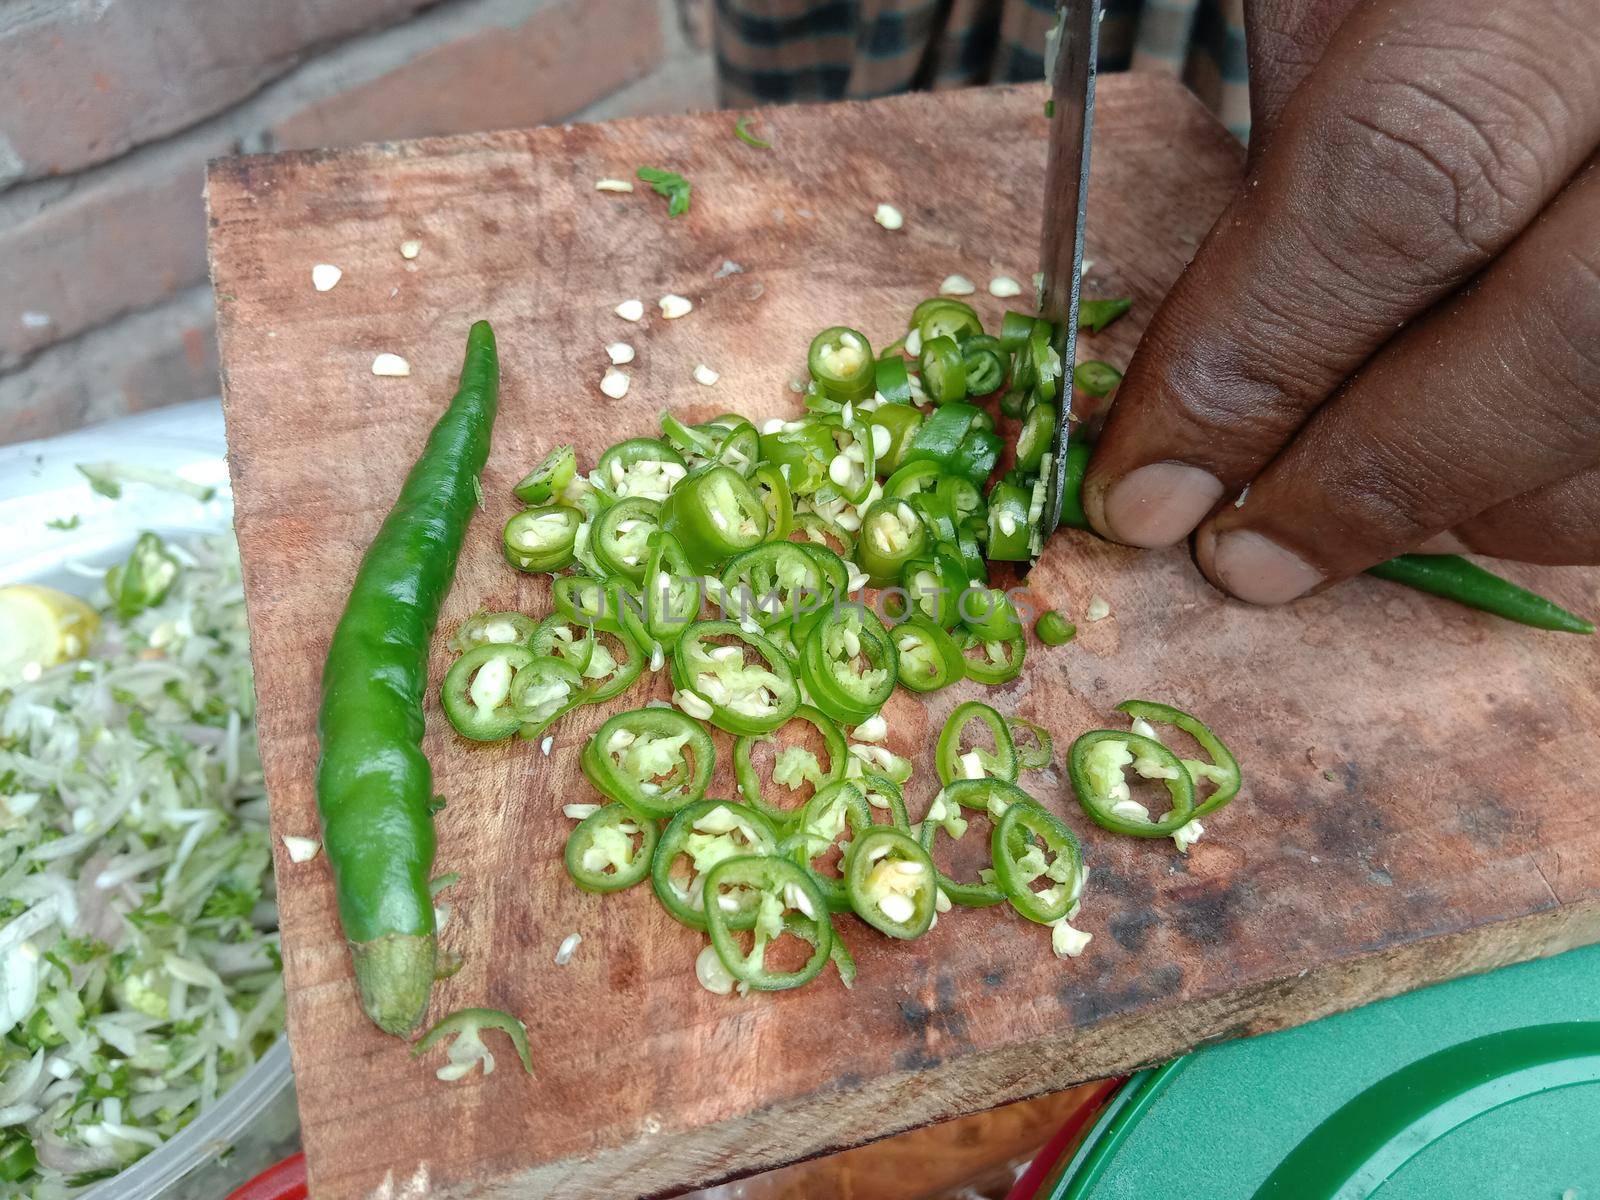 hot slice green chili peppers stock on chopping board for cooking